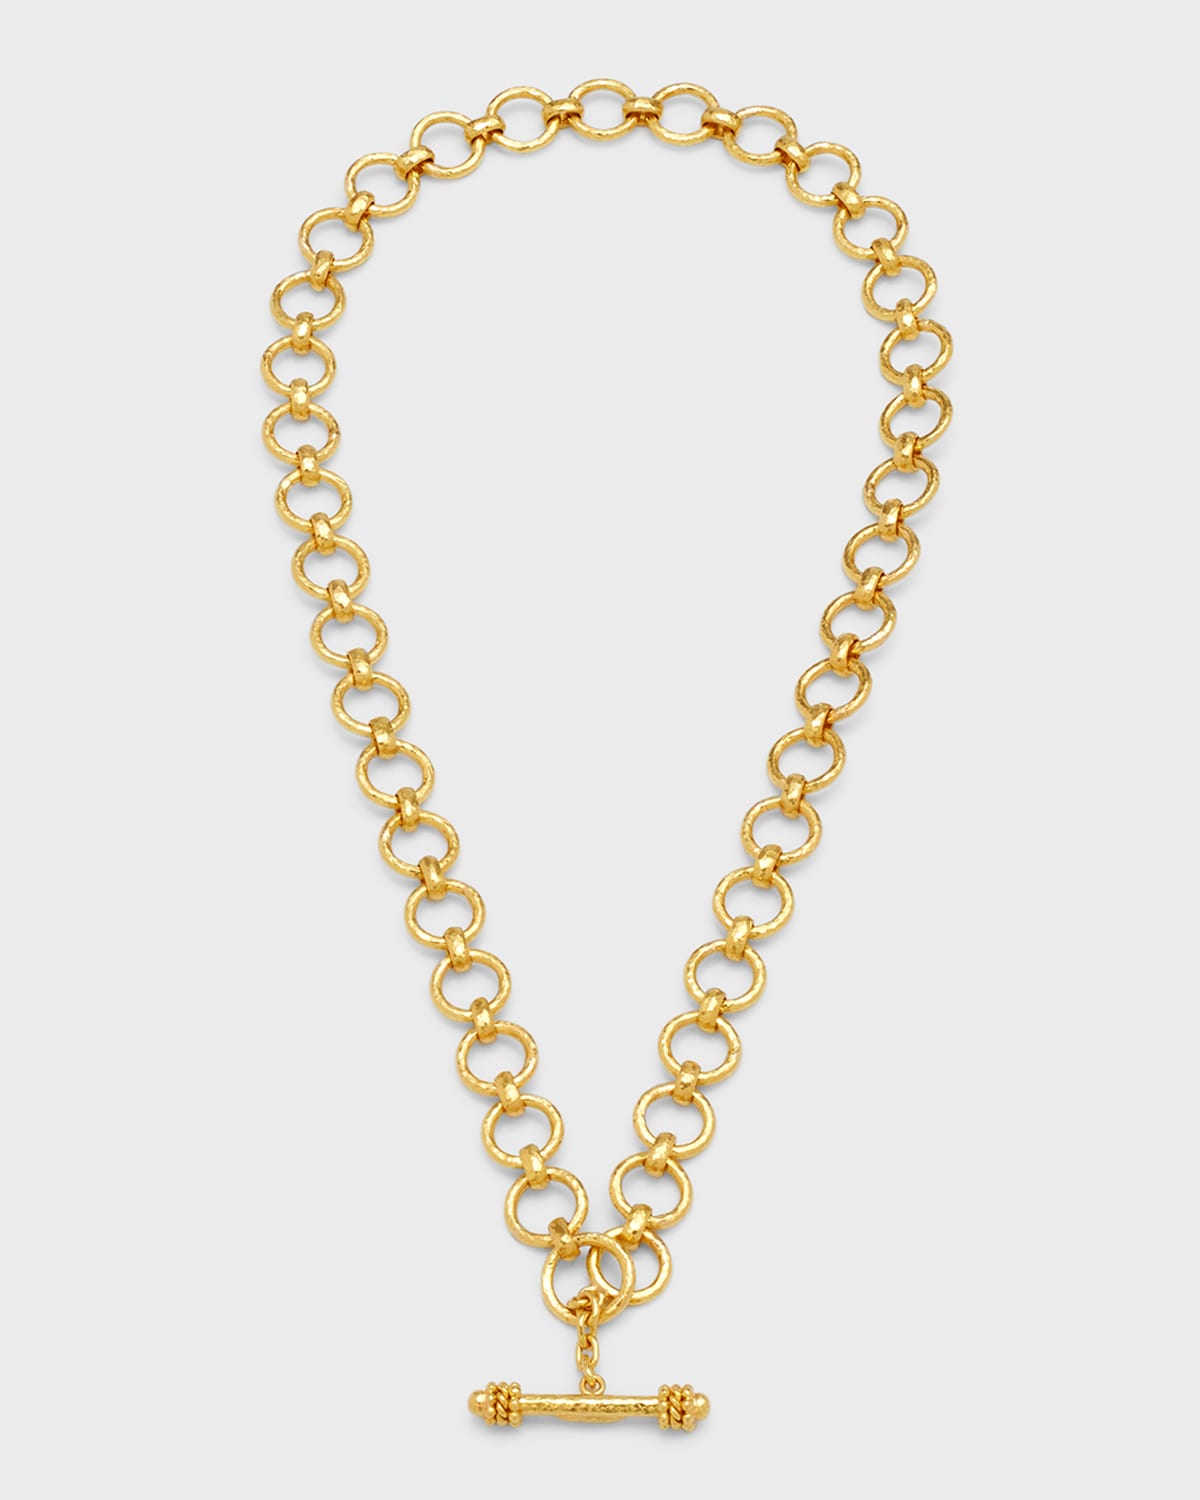 Elizabeth Locke 19K Yellow Gold Farnese Link Necklace with Toggle, 17"L